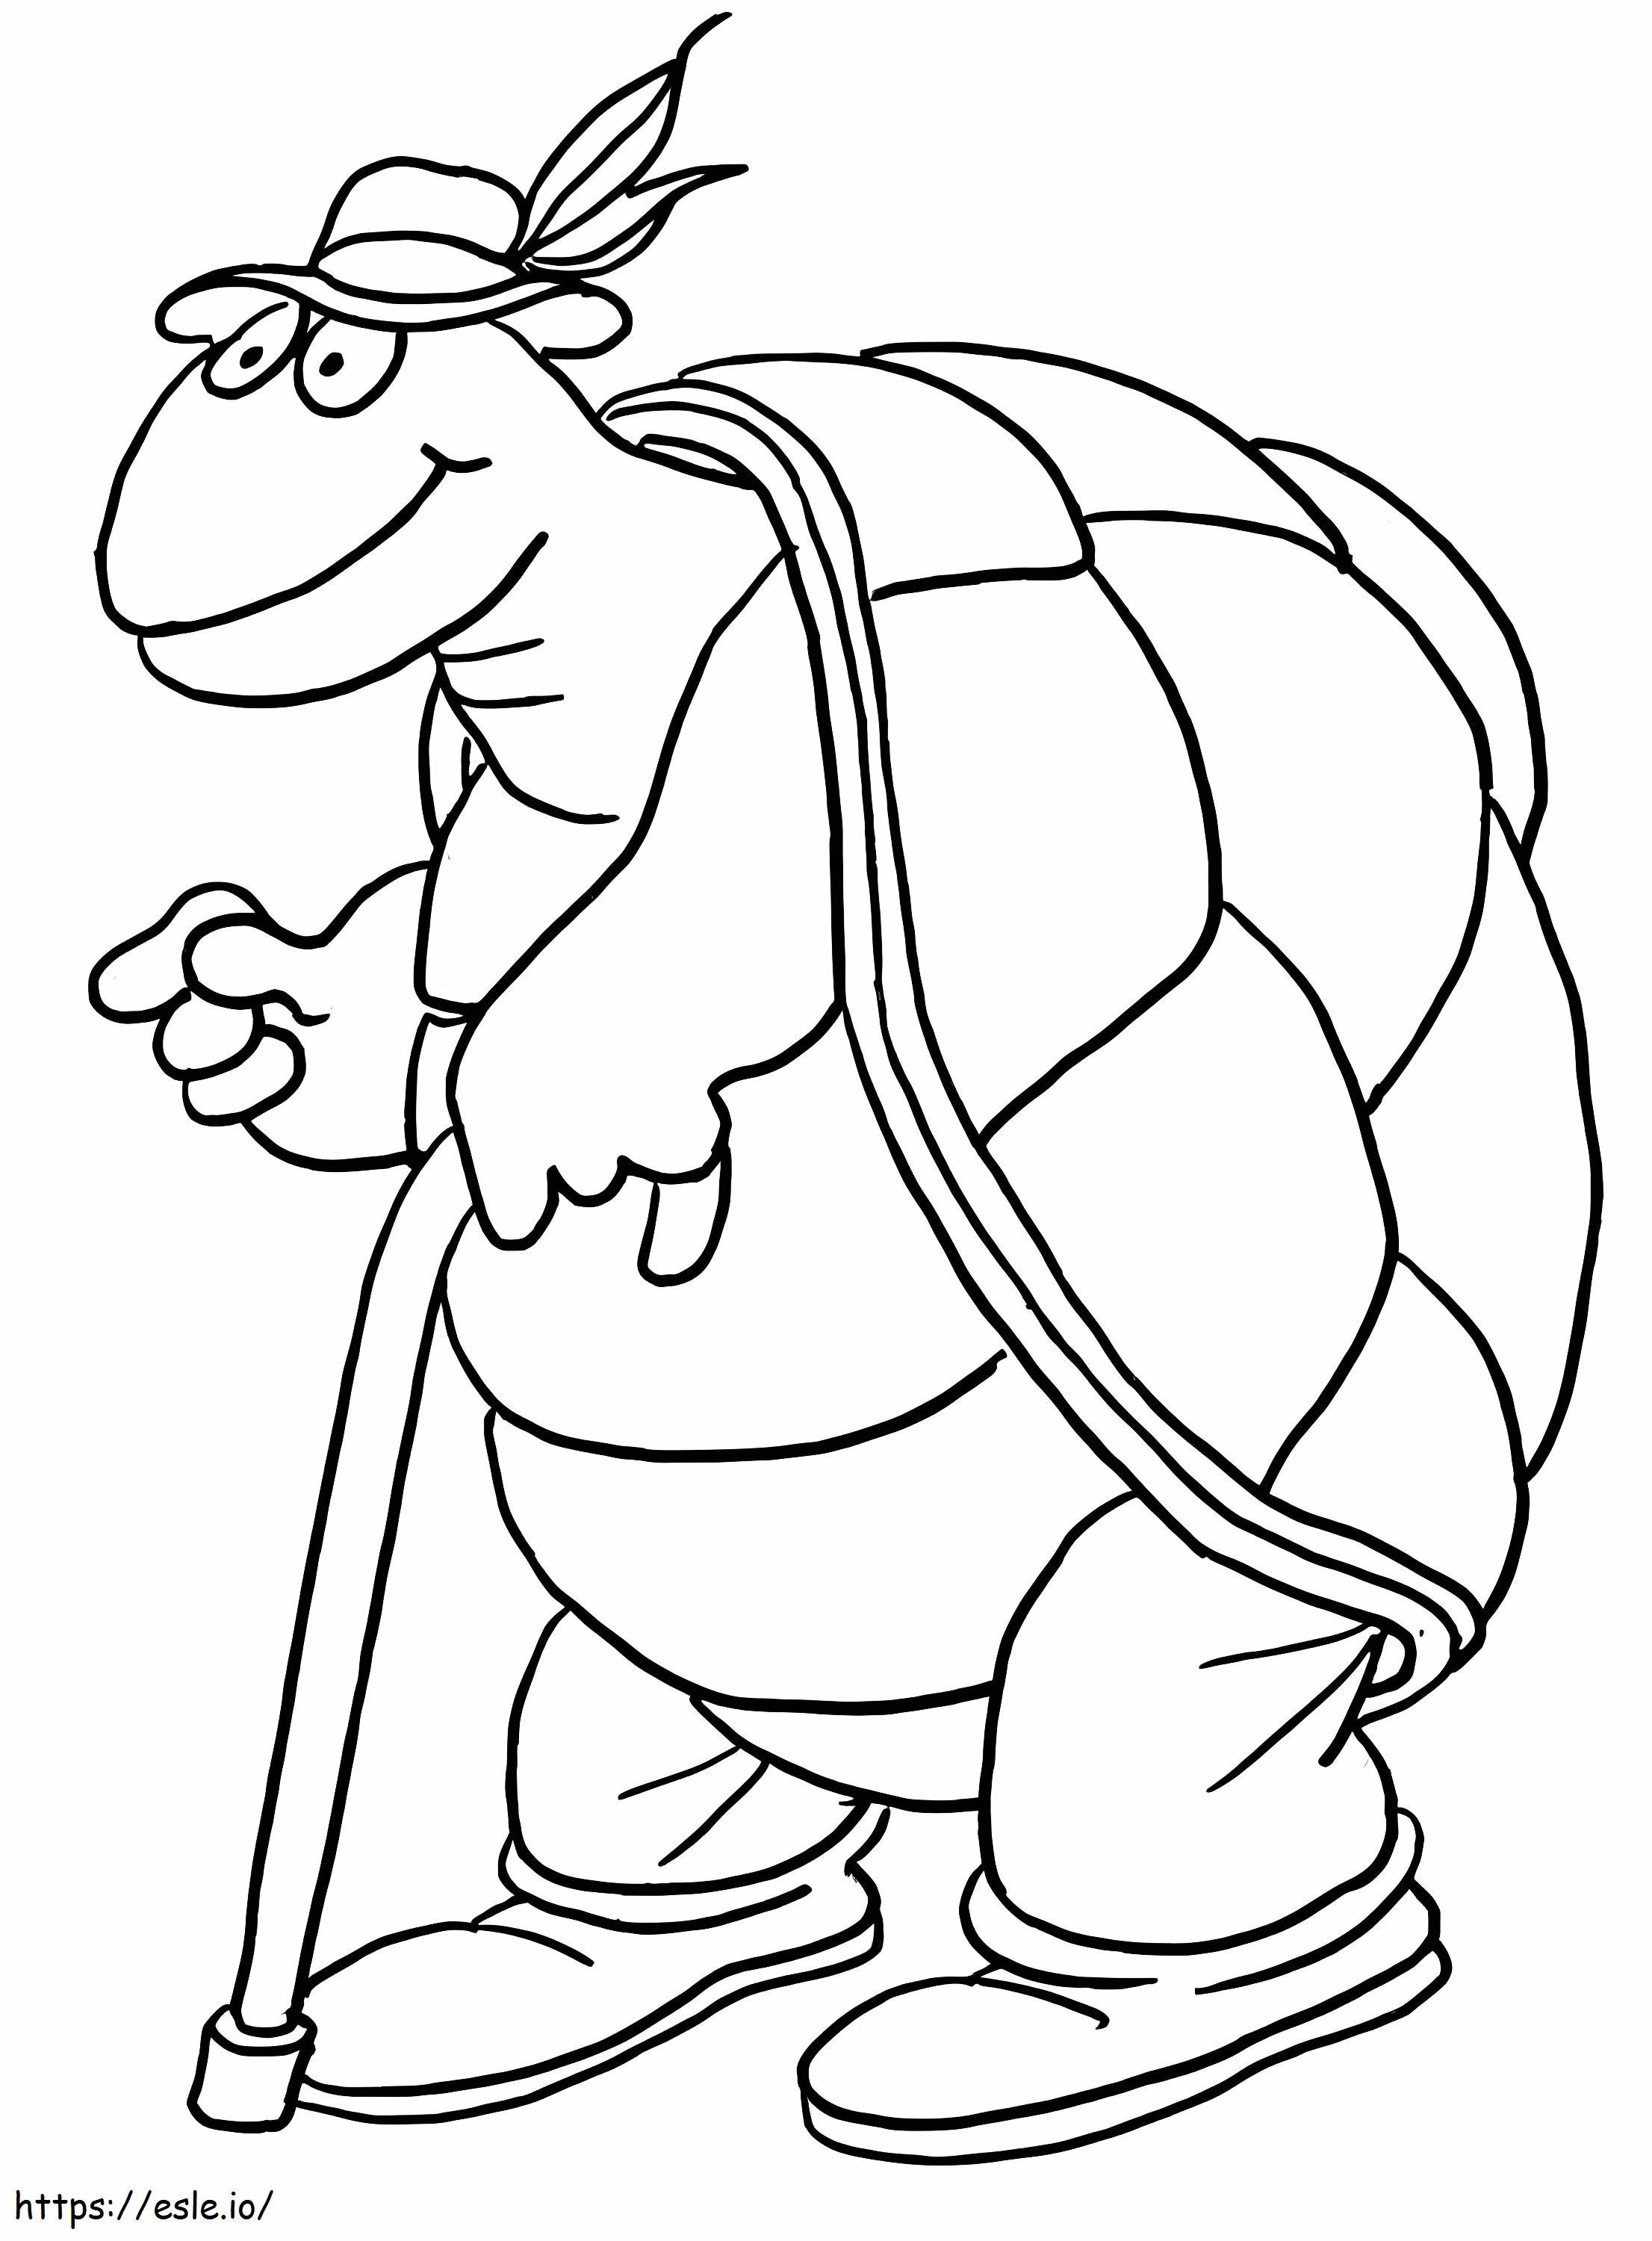 Old Turtle coloring page